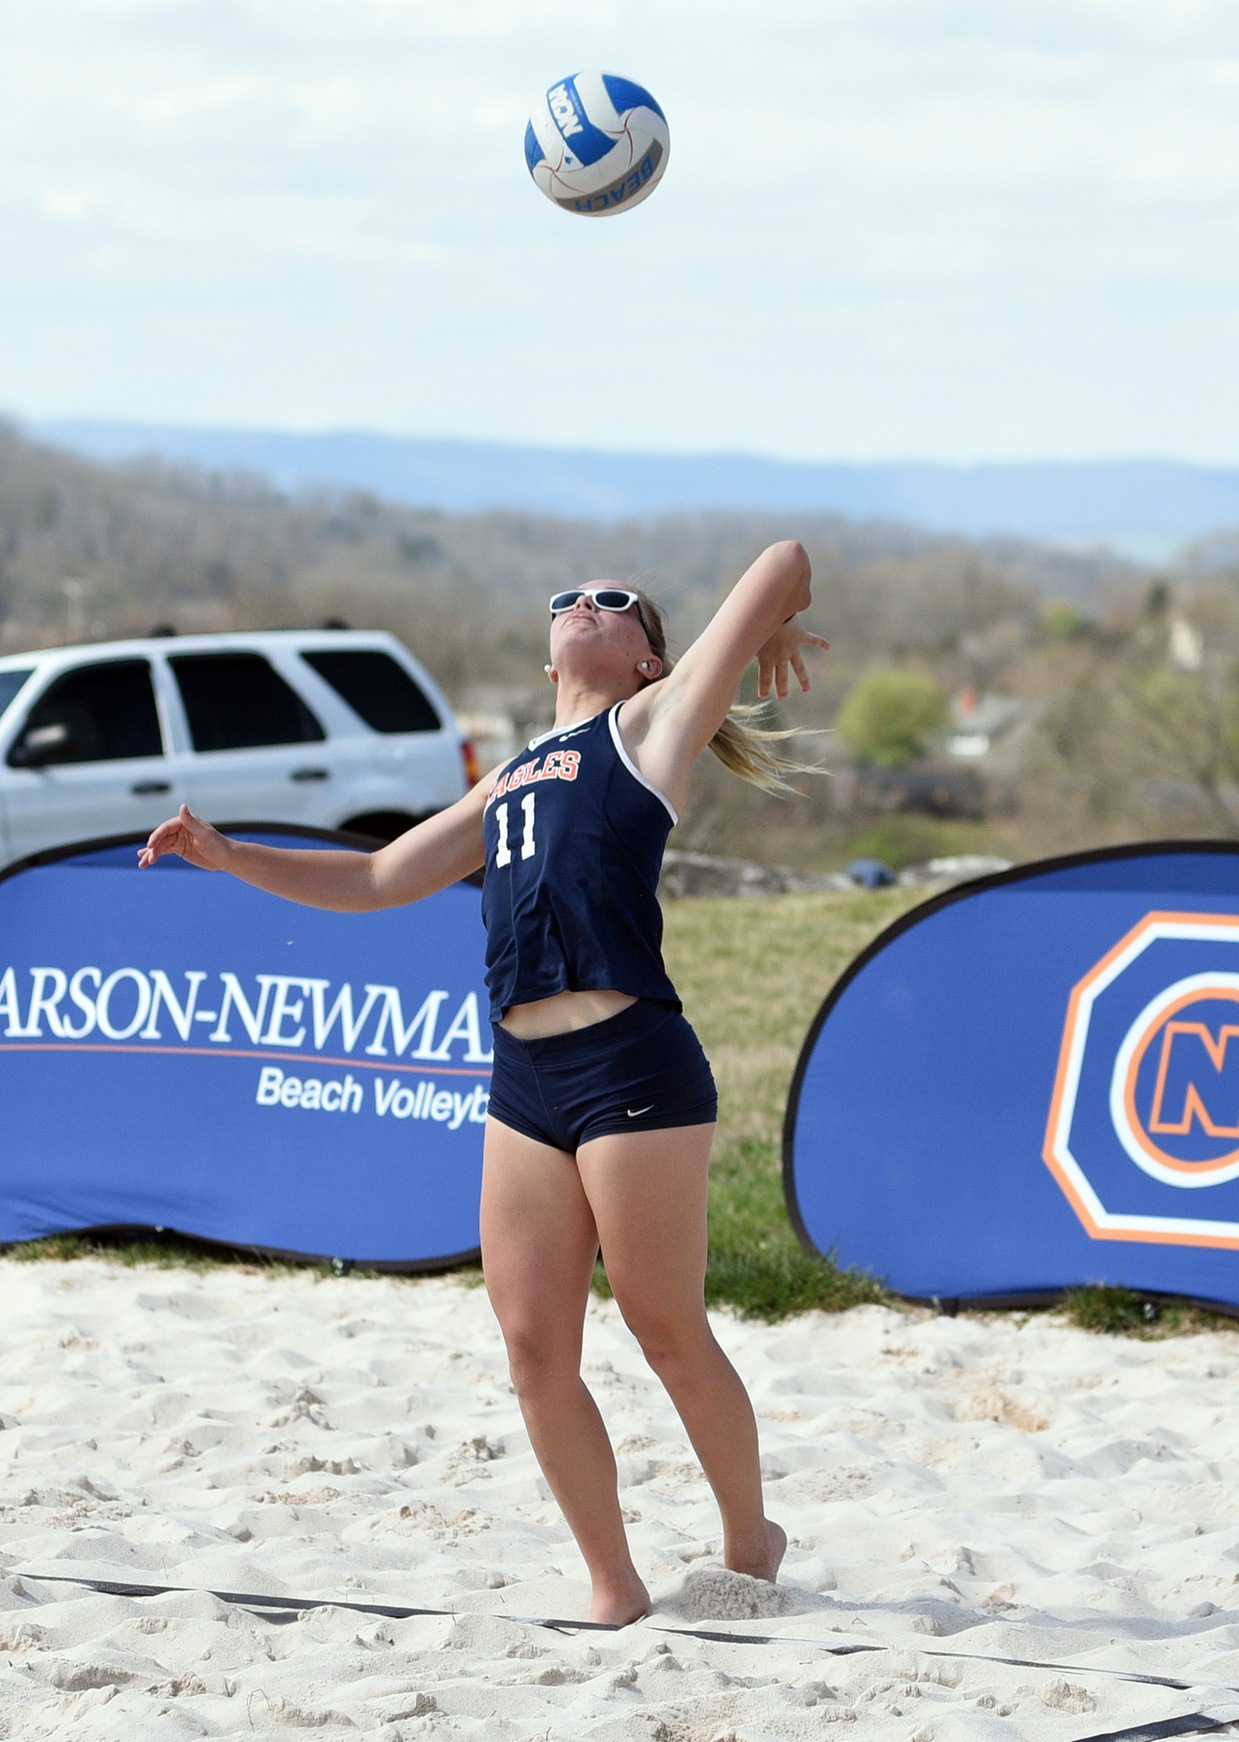 Season ends for C-N as Bronze Playoff Runner-Up at Small College Championships